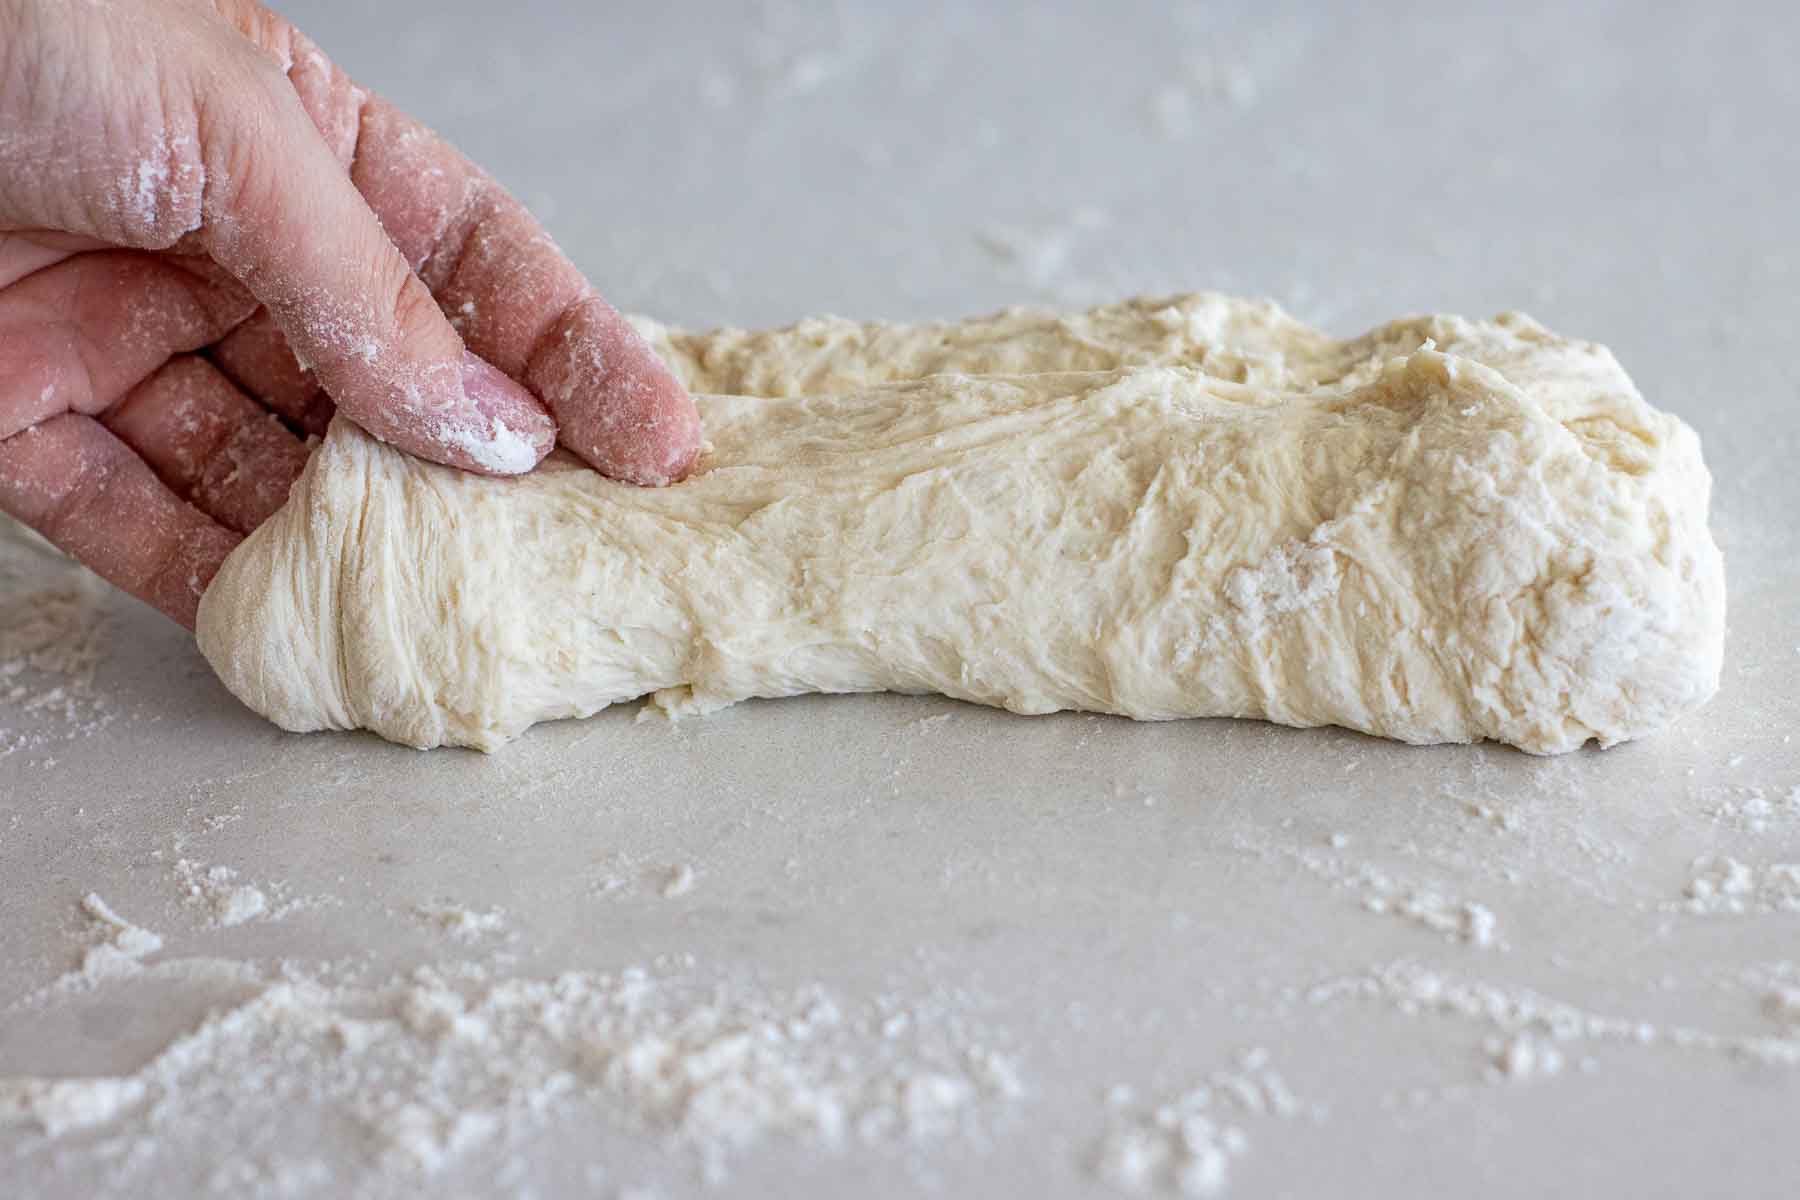 Folding the other half of the baguette dough.